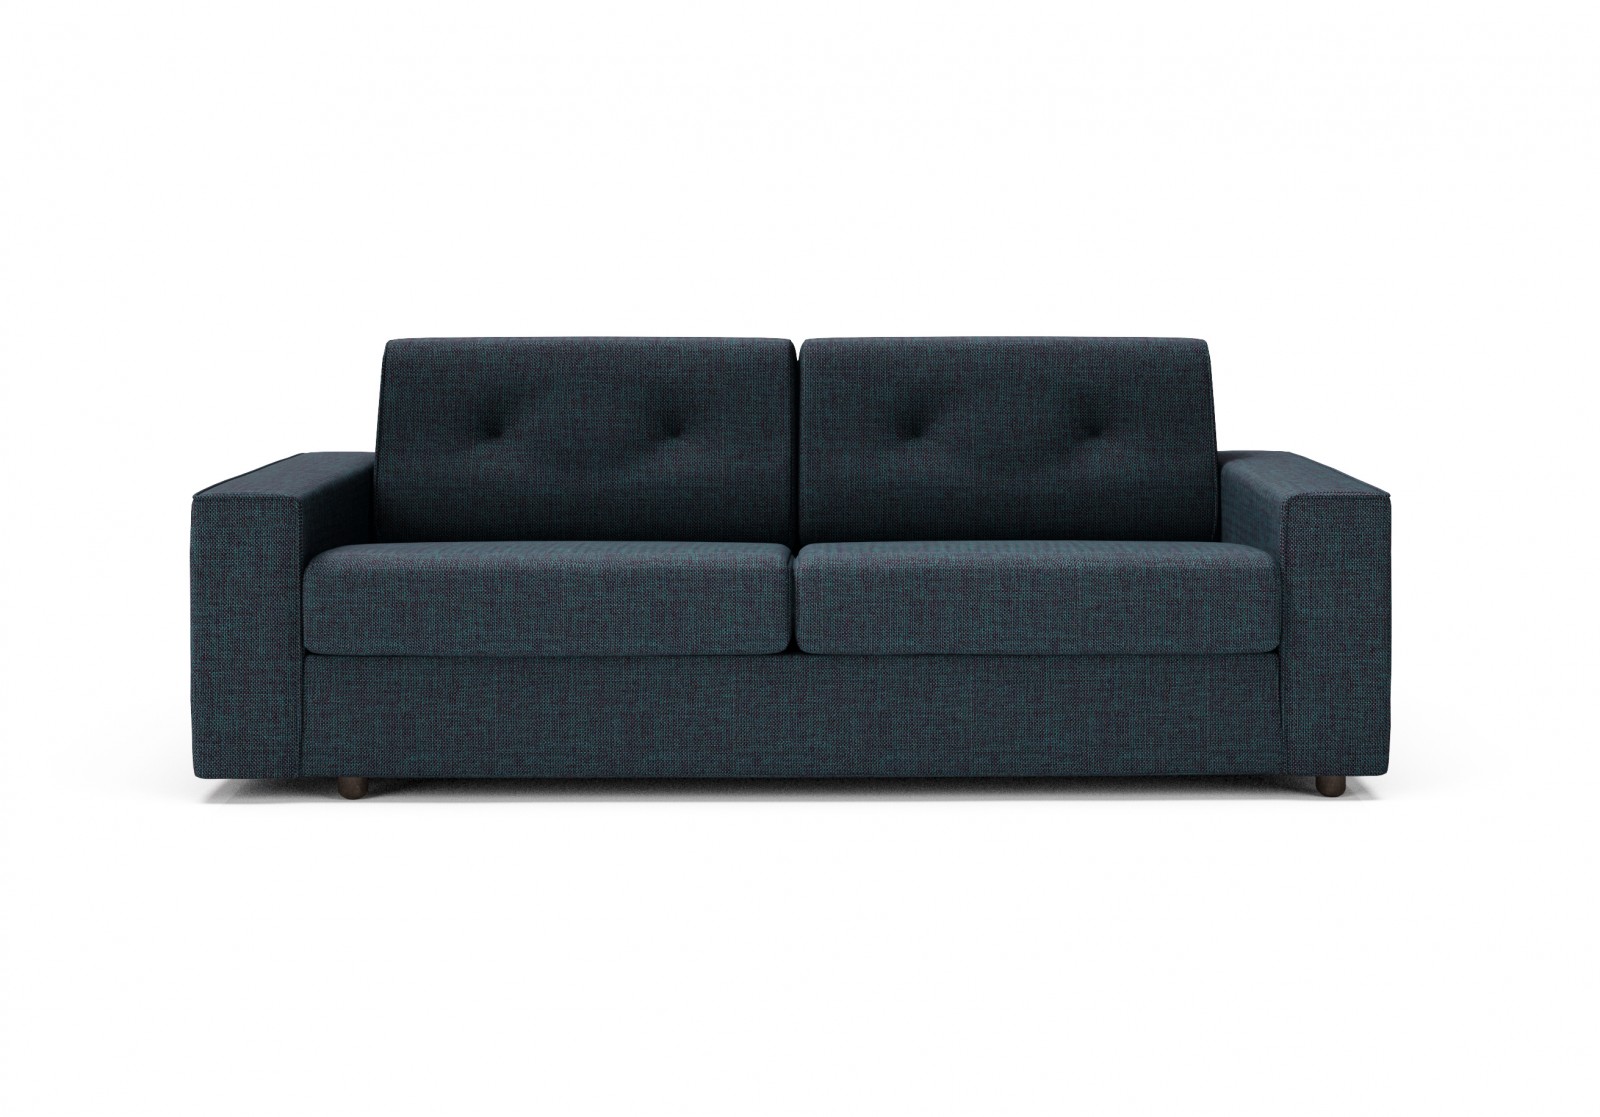 Sofa bed - Double size